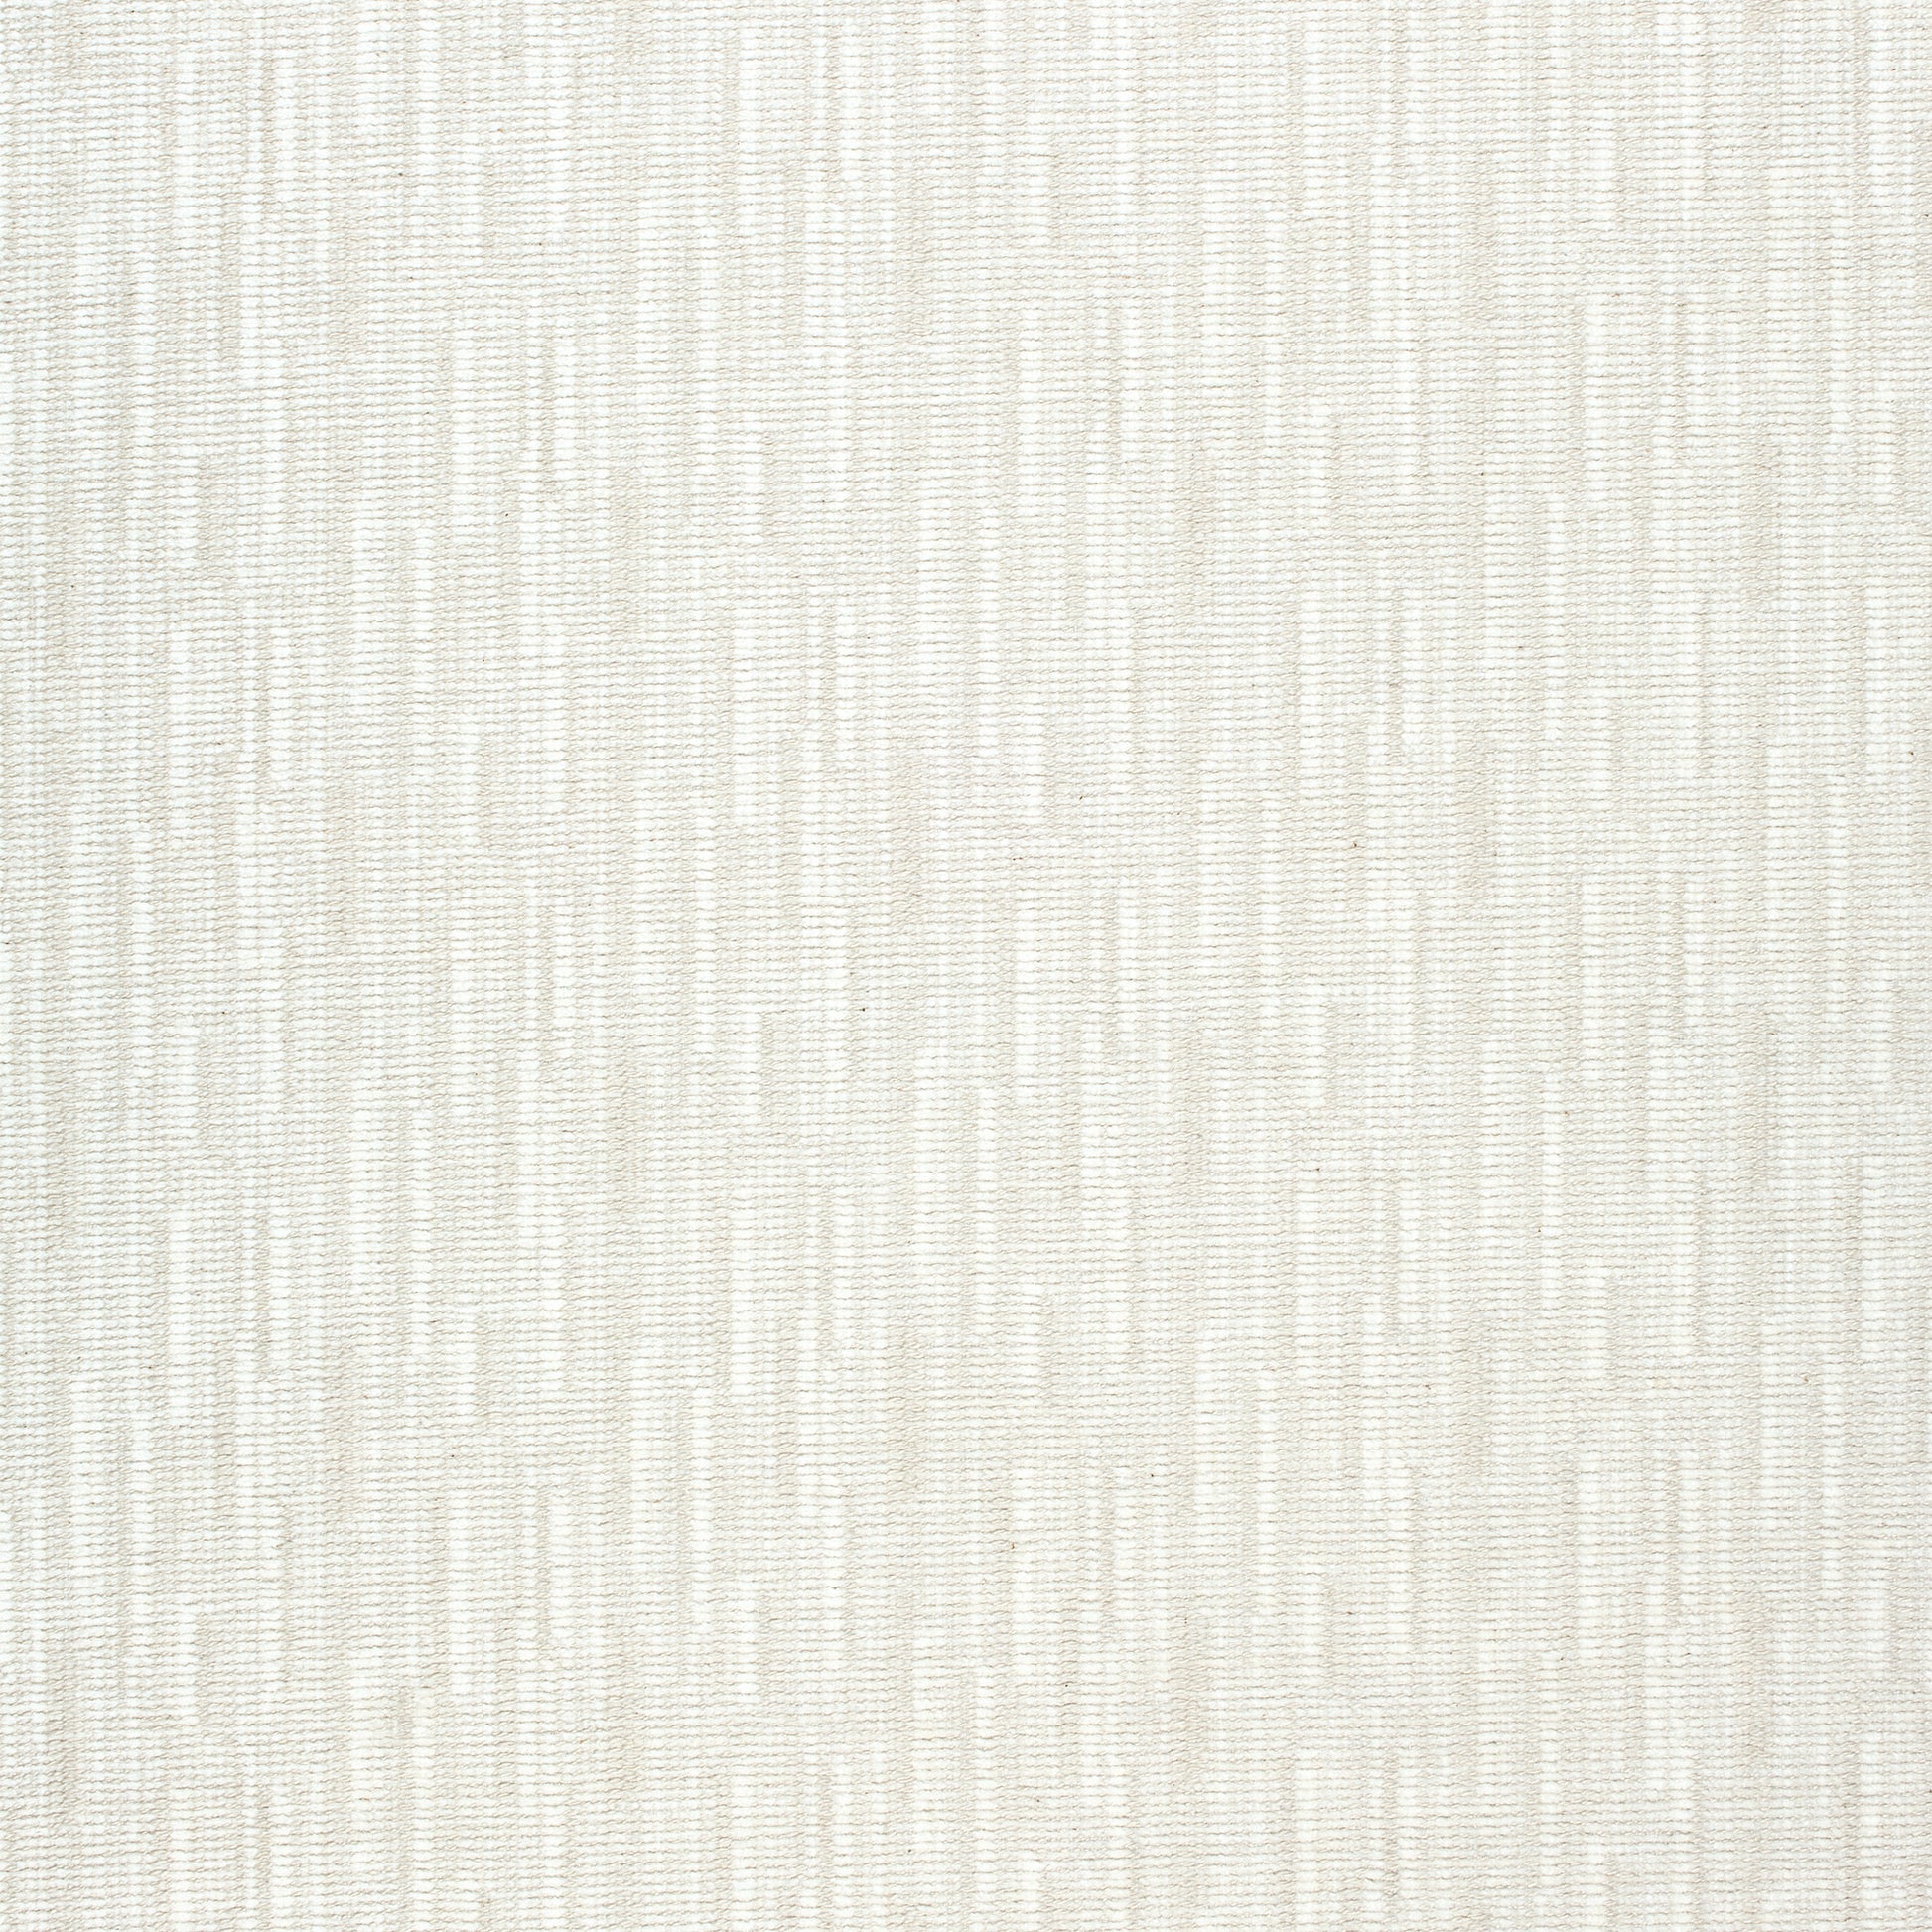 Purchase Thibaut Fabric Item# W789119 pattern name Dominic color Almond